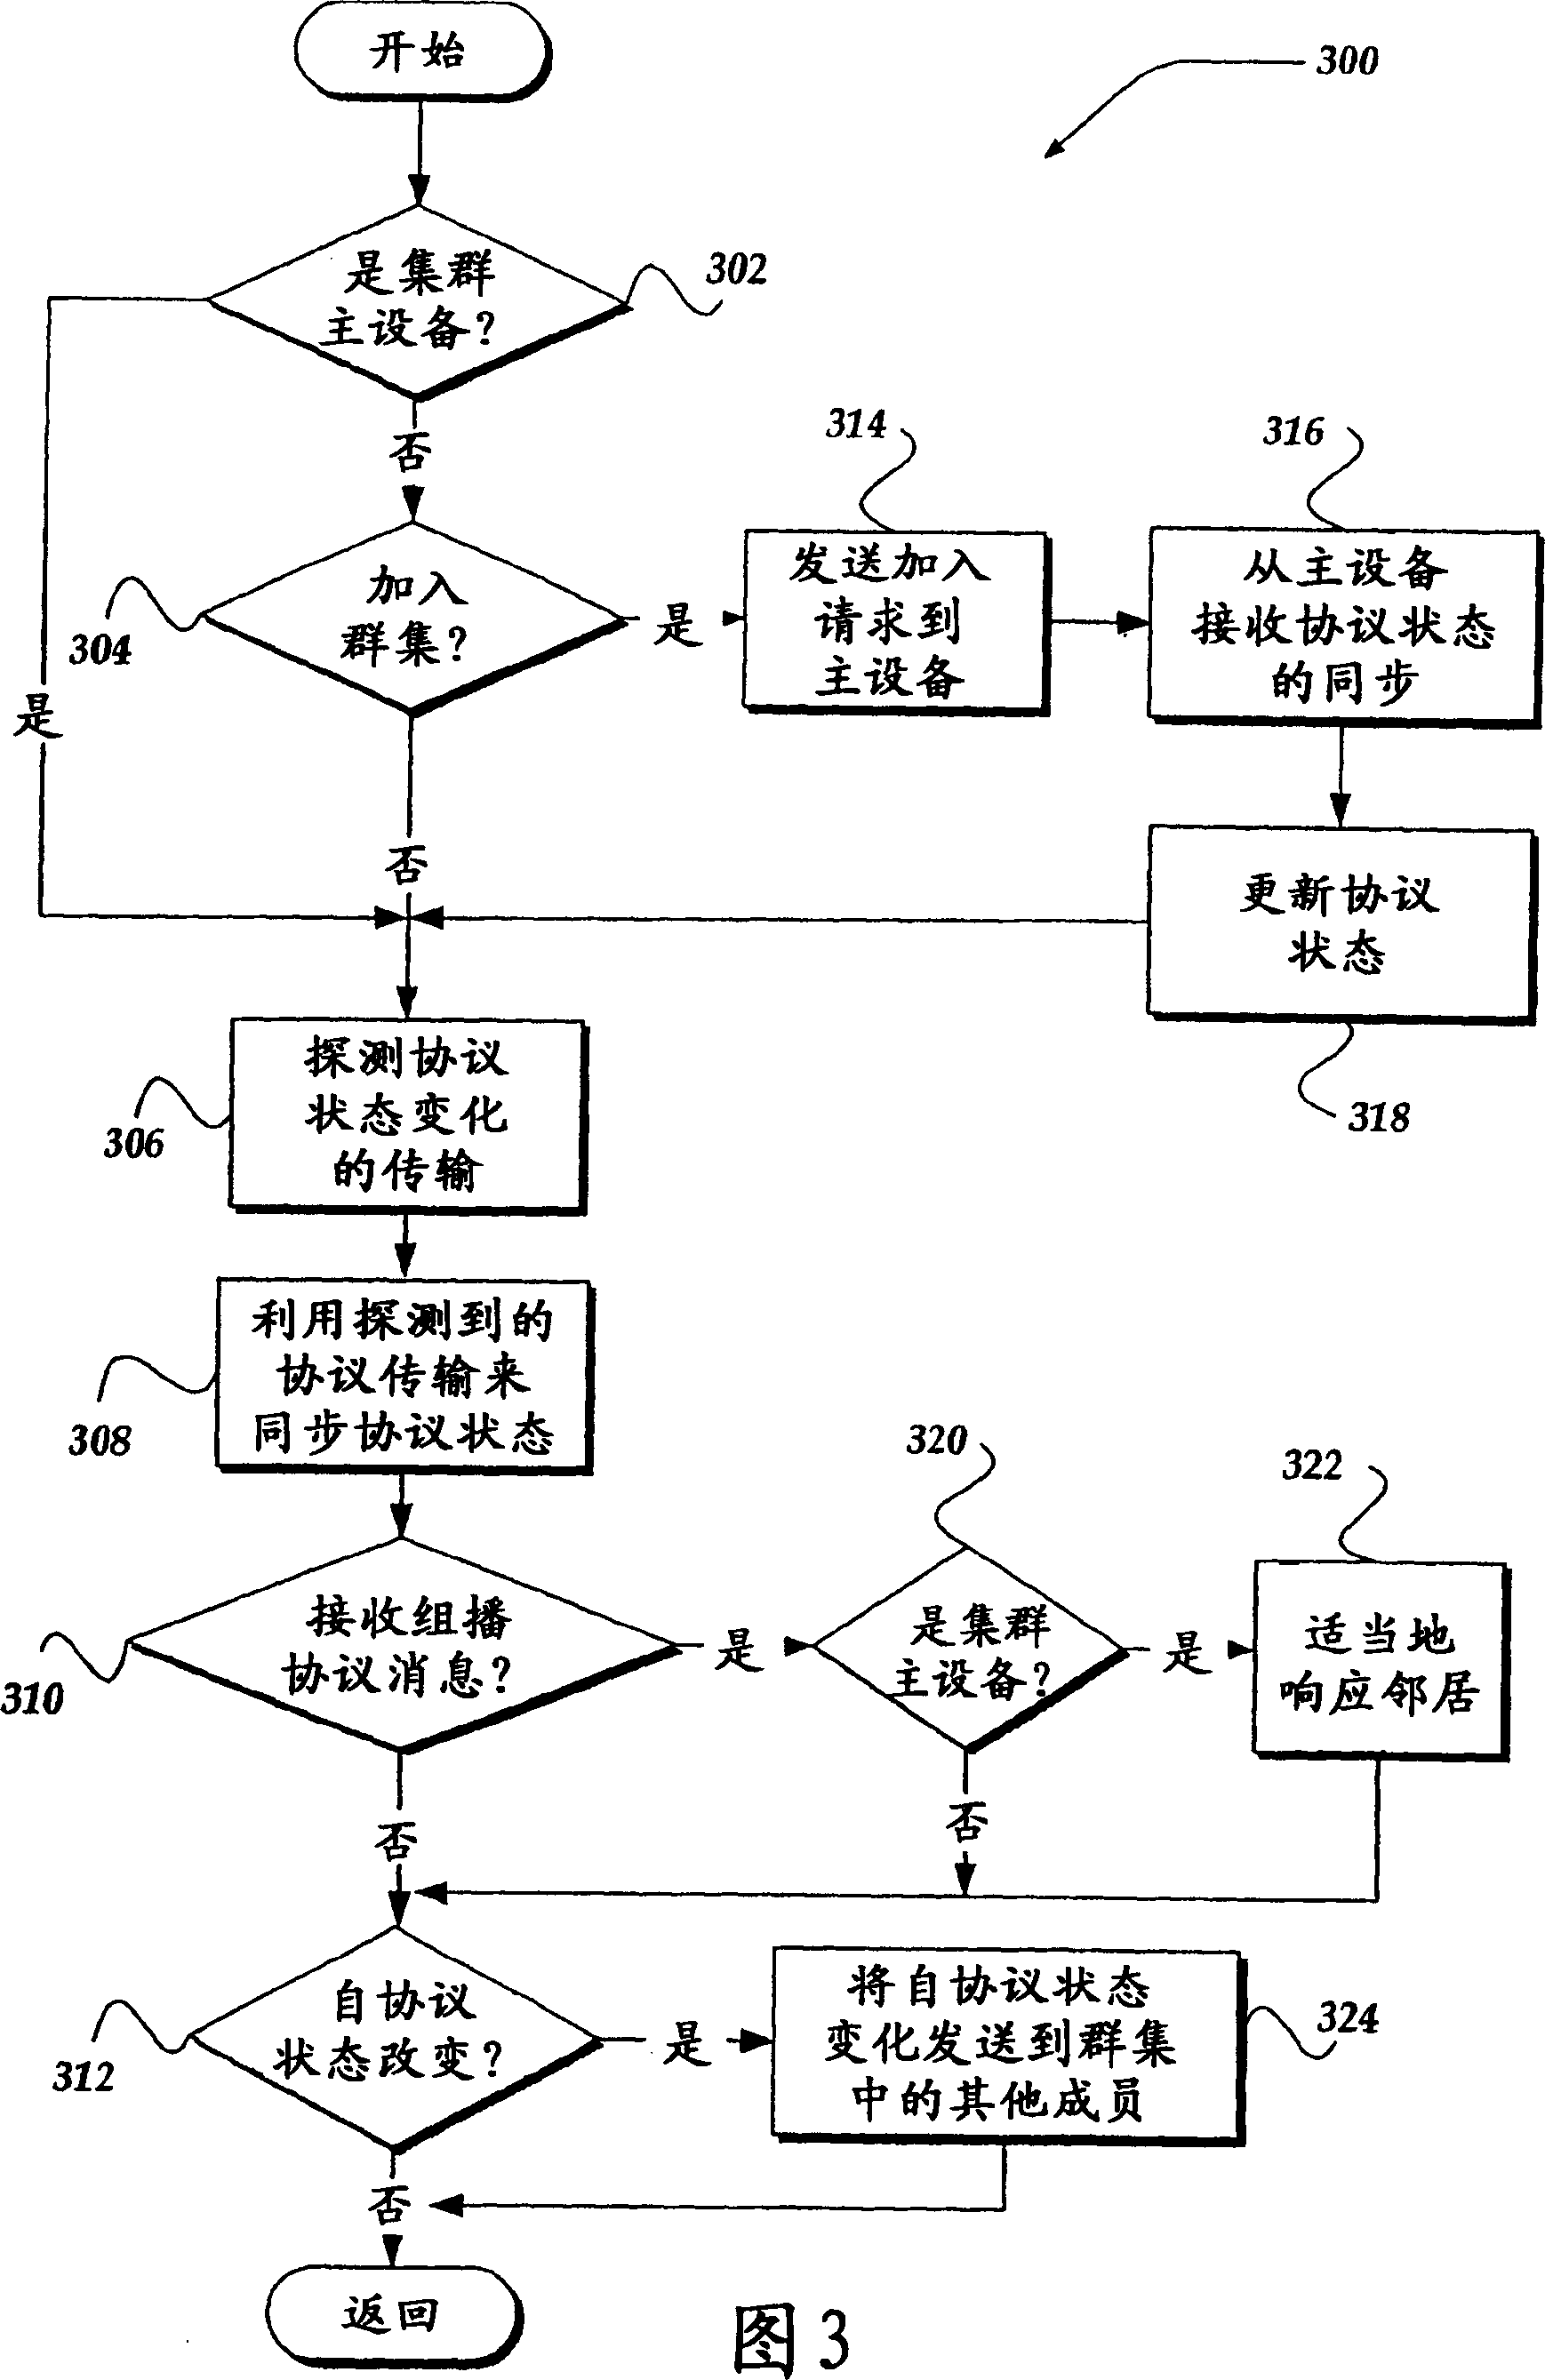 Virtual multicast routing for a cluster having state synchronization